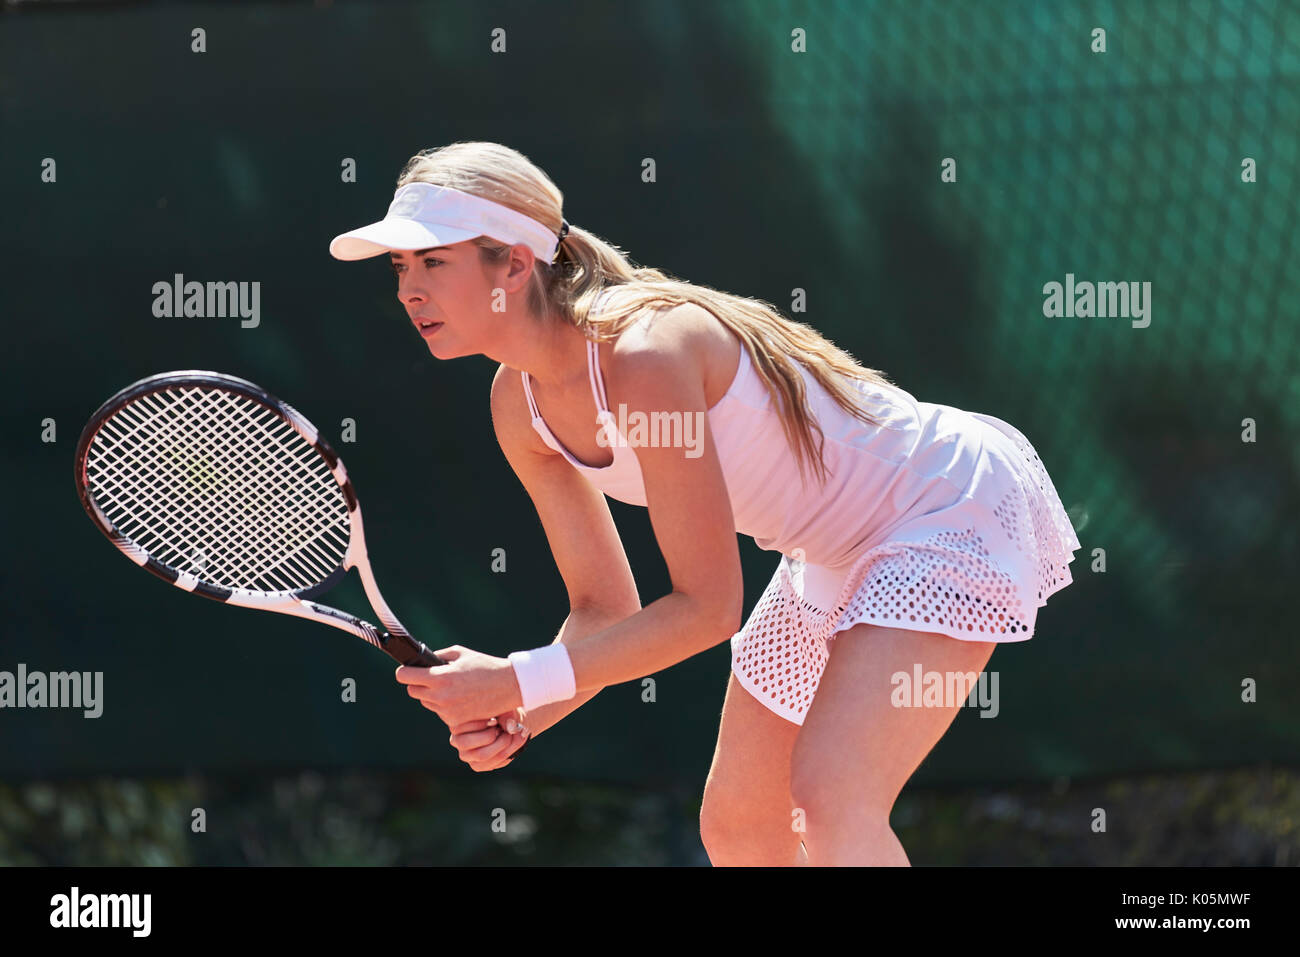 Focused young female tennis player ready, playing tennis Stock Photo